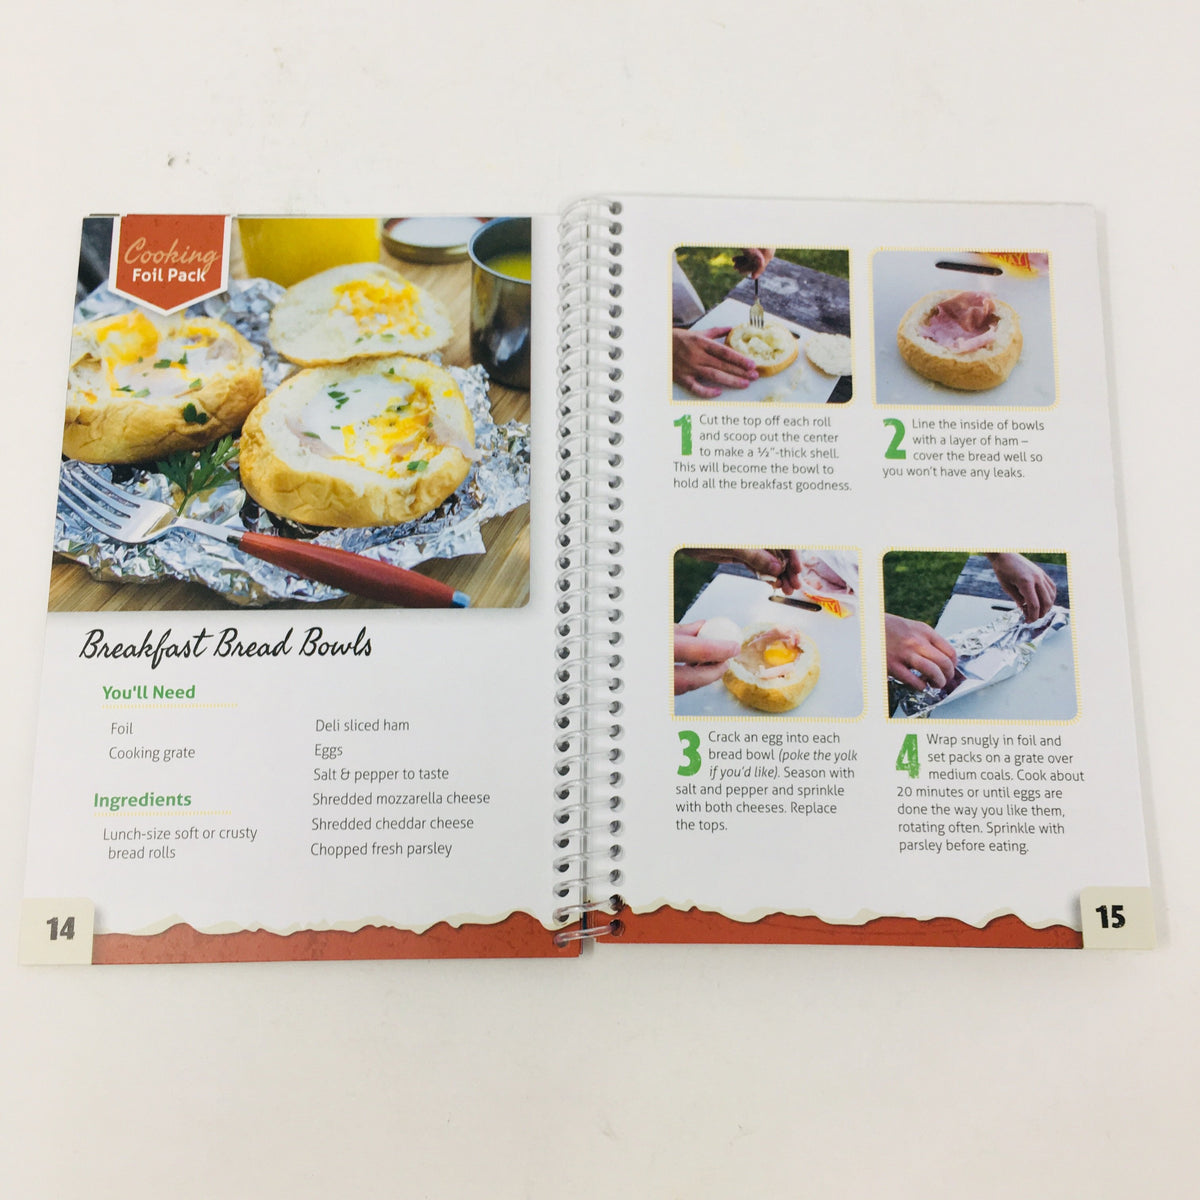 interior pages of cookbook showing recipes